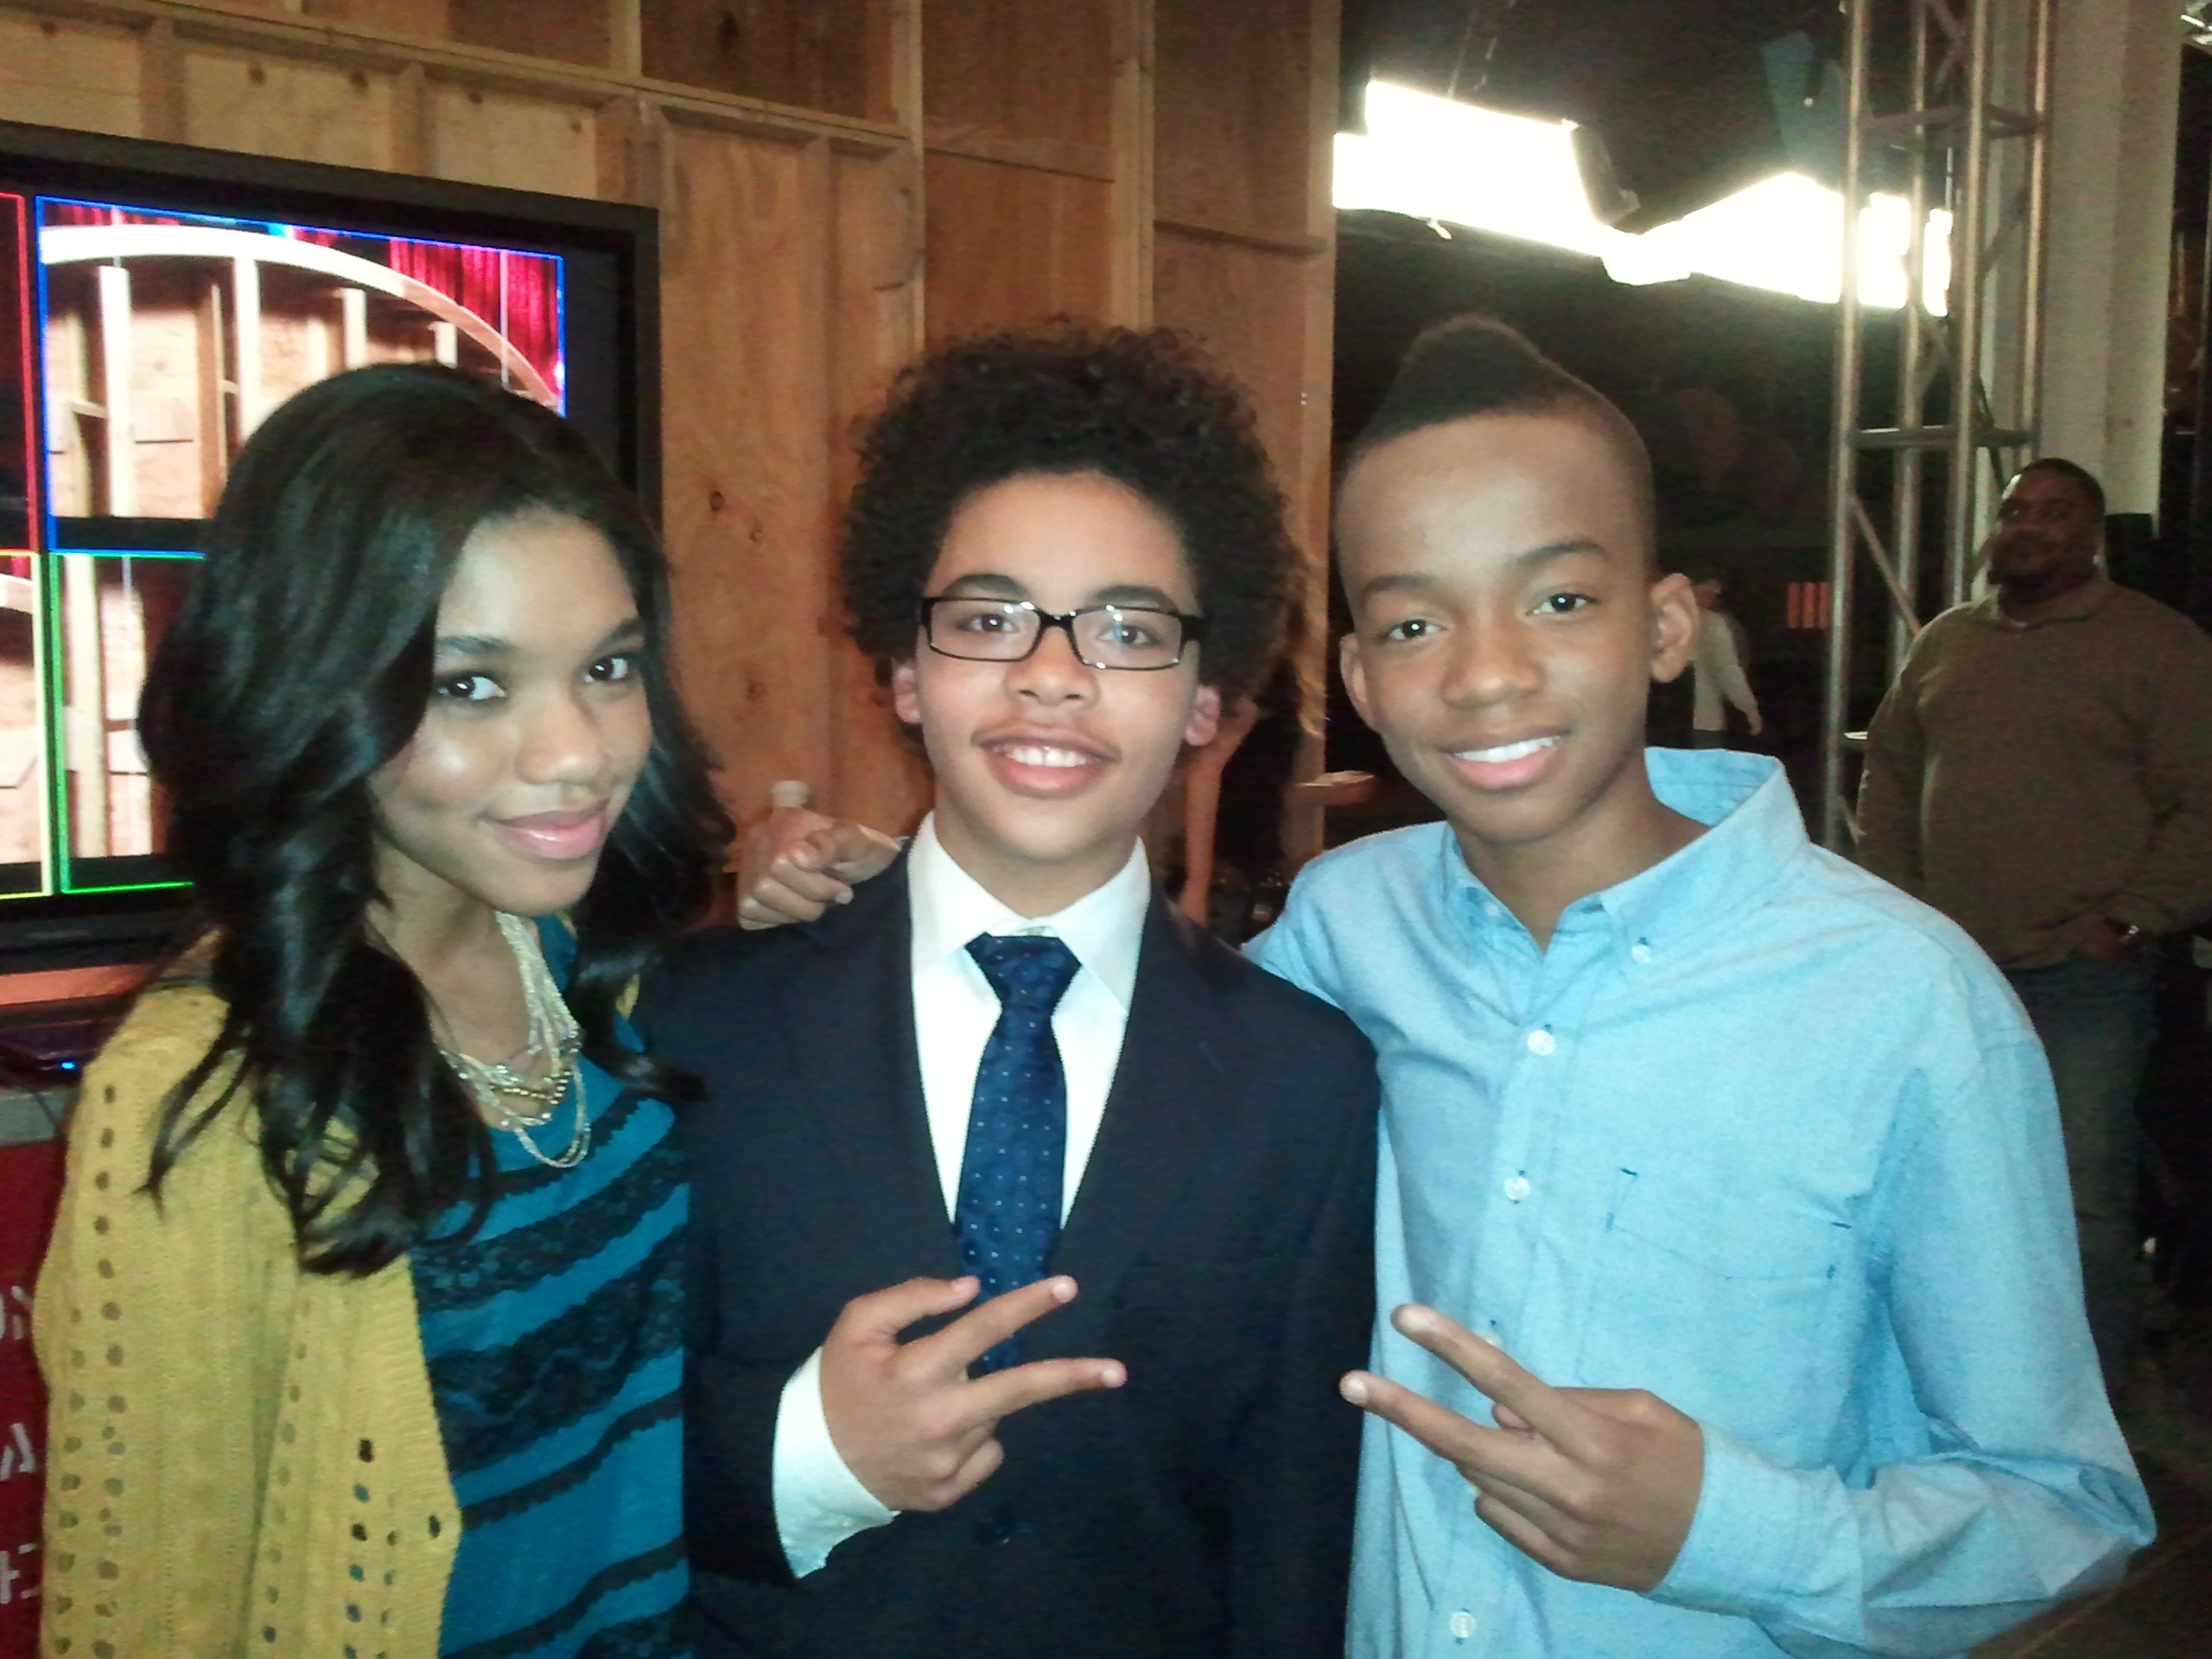 Devon with Teala Dunn and Coy Stewart during filming of an episode of Are We There Yet?